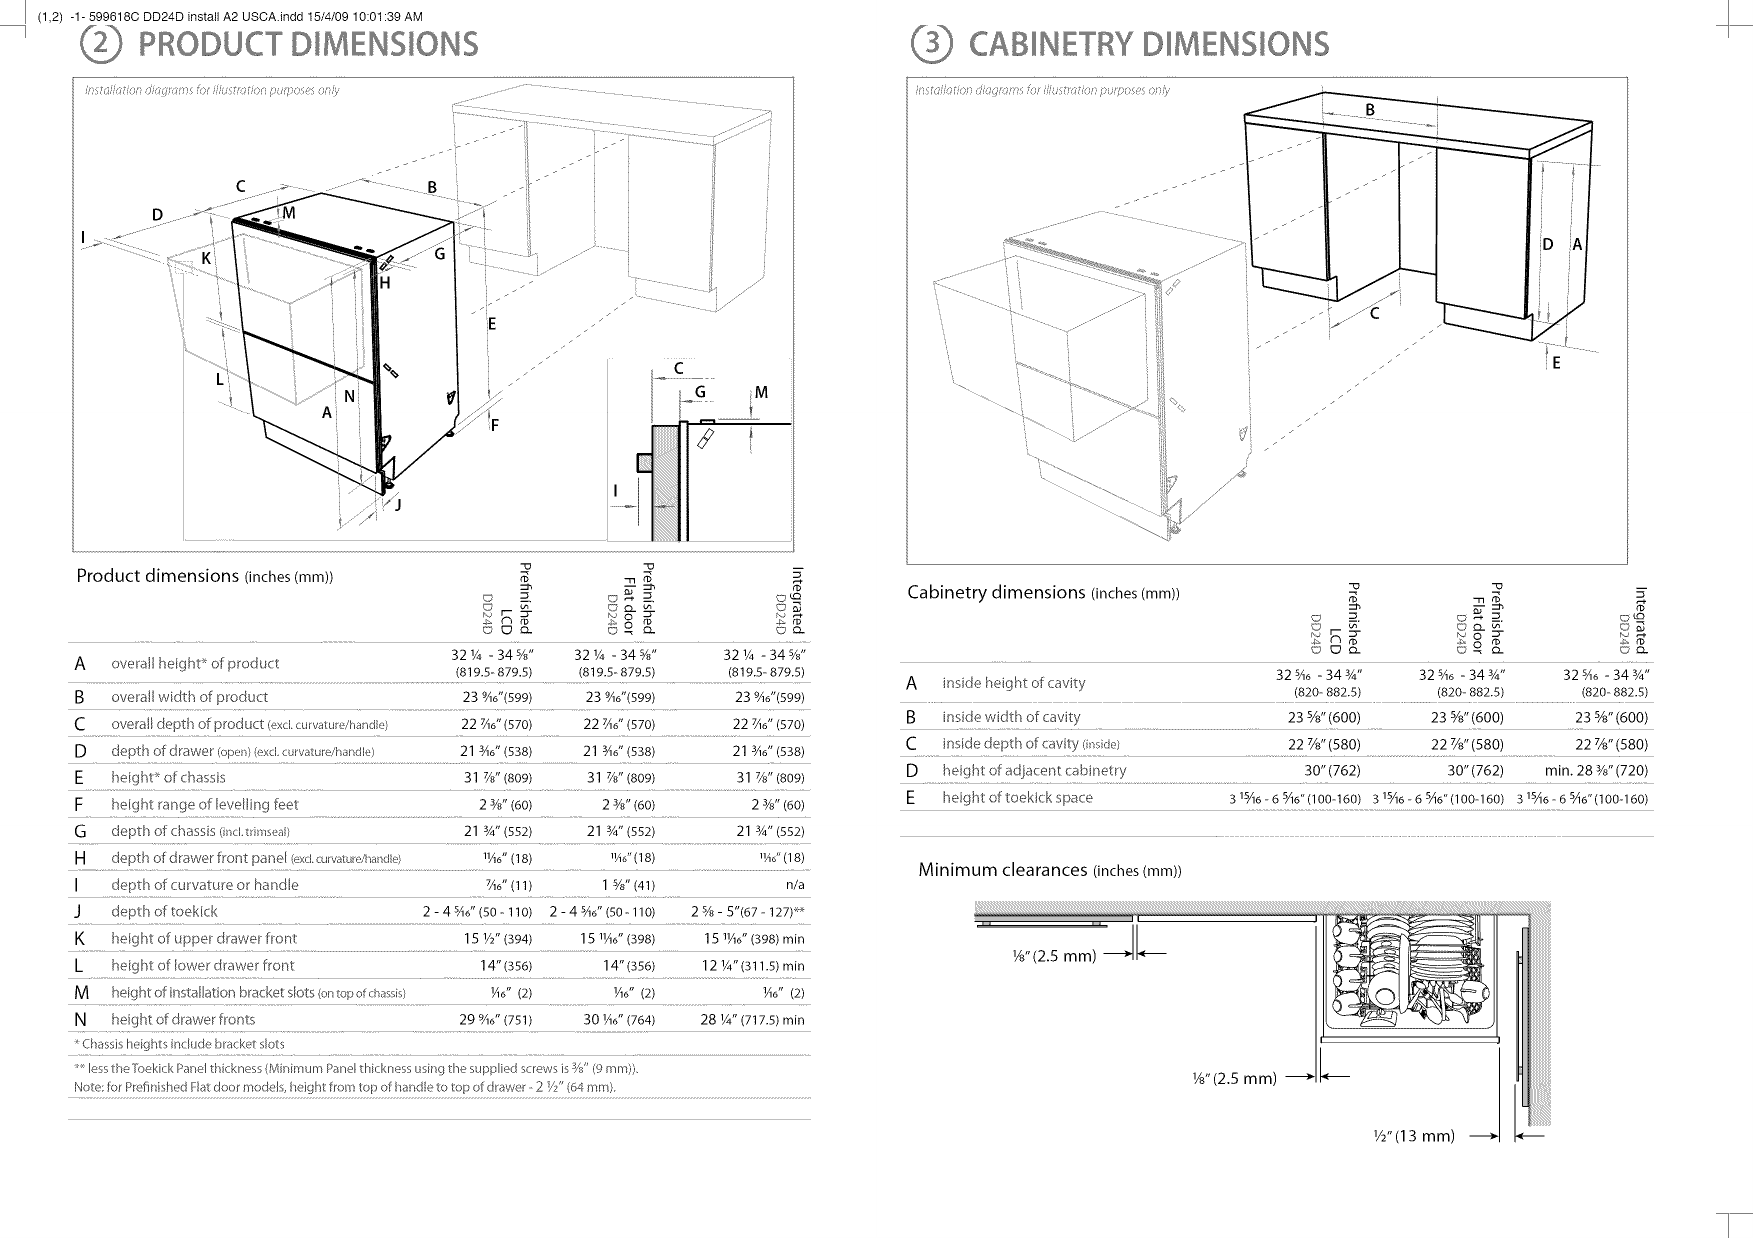 Page 2 of 8 - FISHERPAYKEL  Dishwasher Manual L0906175